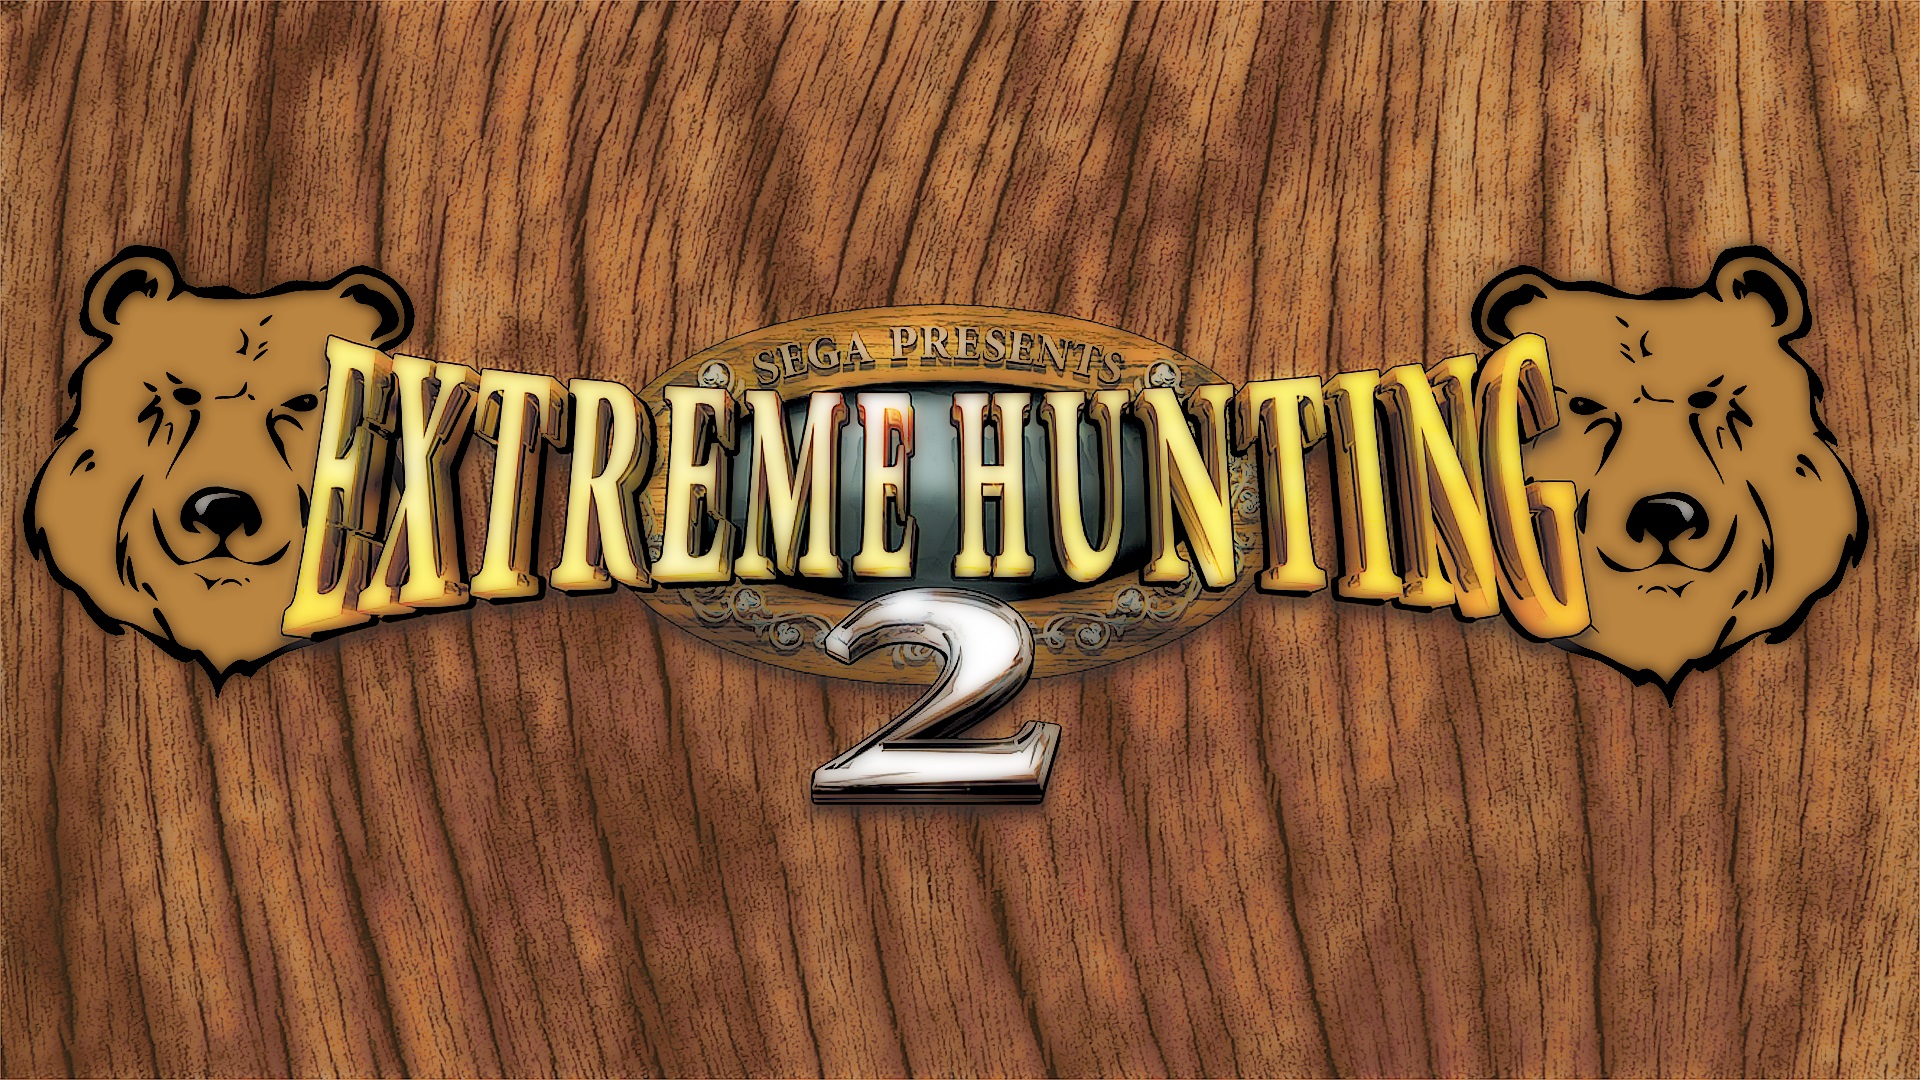 Extreme Hunting 2